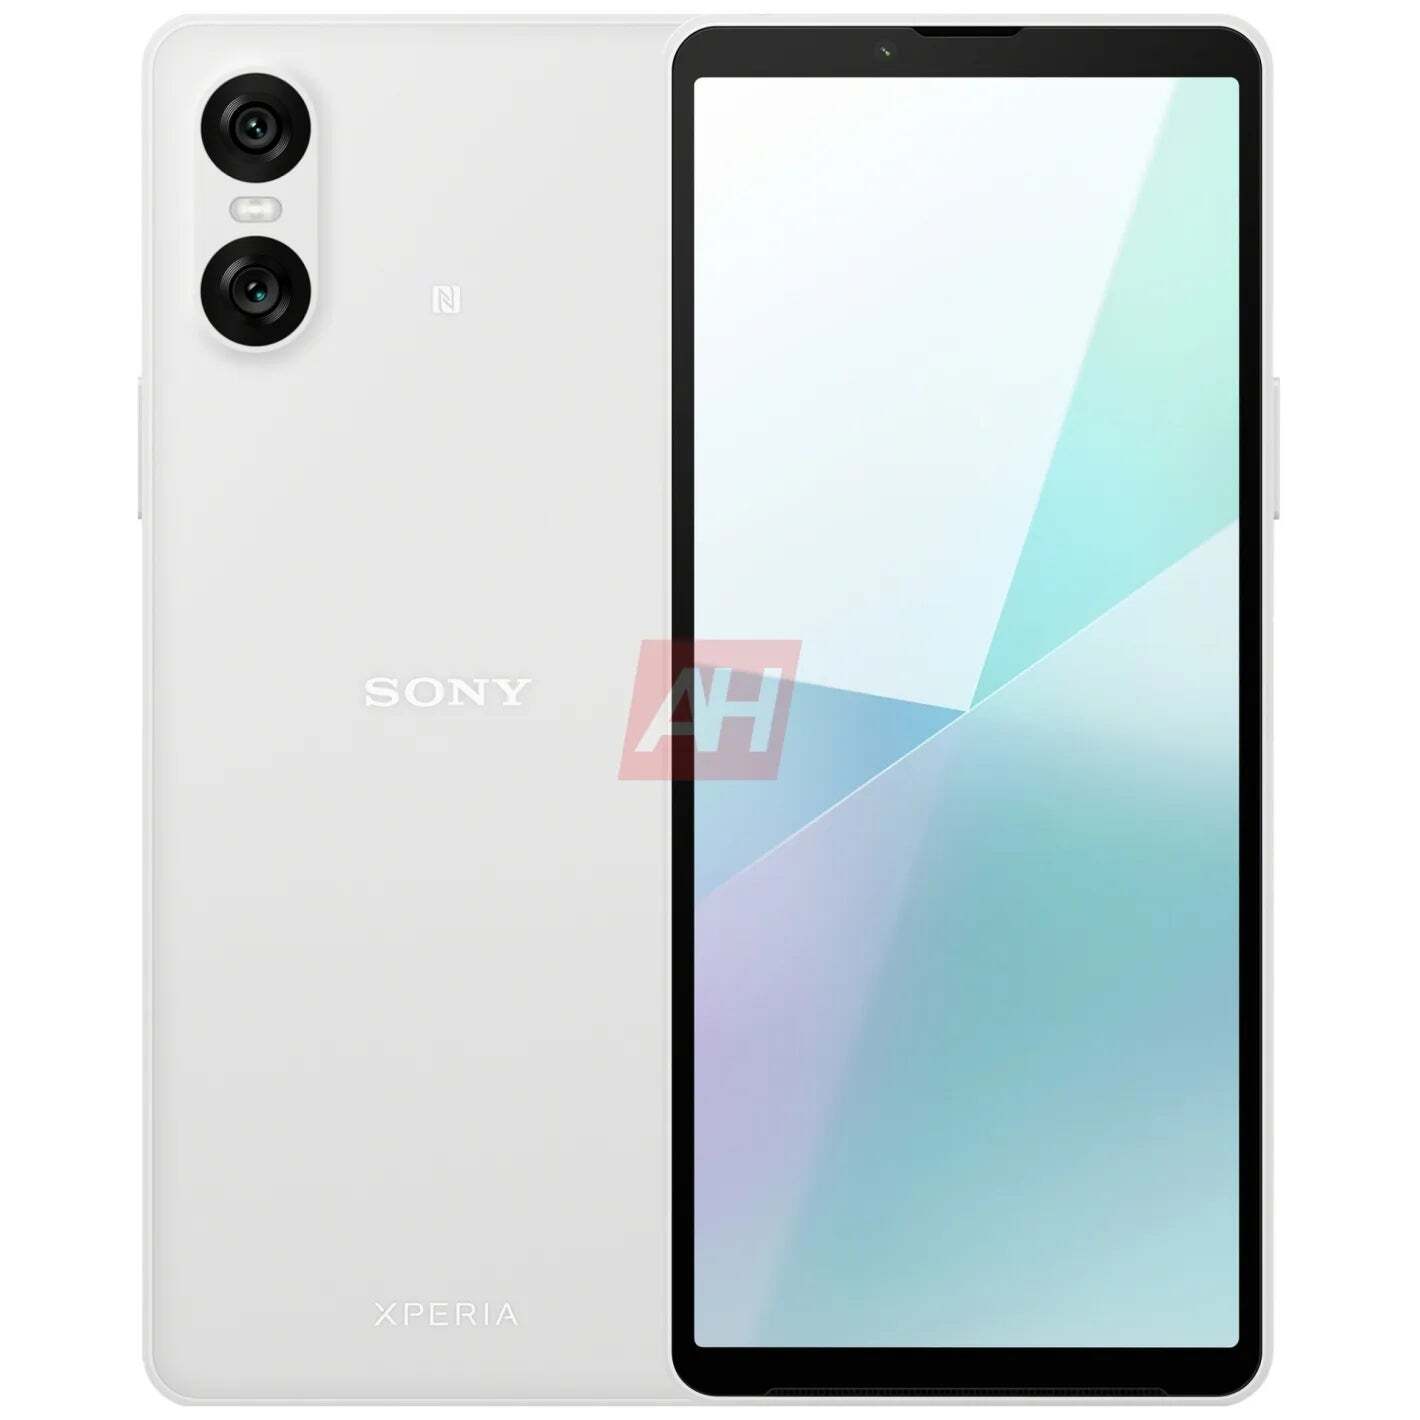 Official picture of the Sony Xperia 10 VI - Benchmark test reveals the chipset that will power the Sony Xperia 10 VI